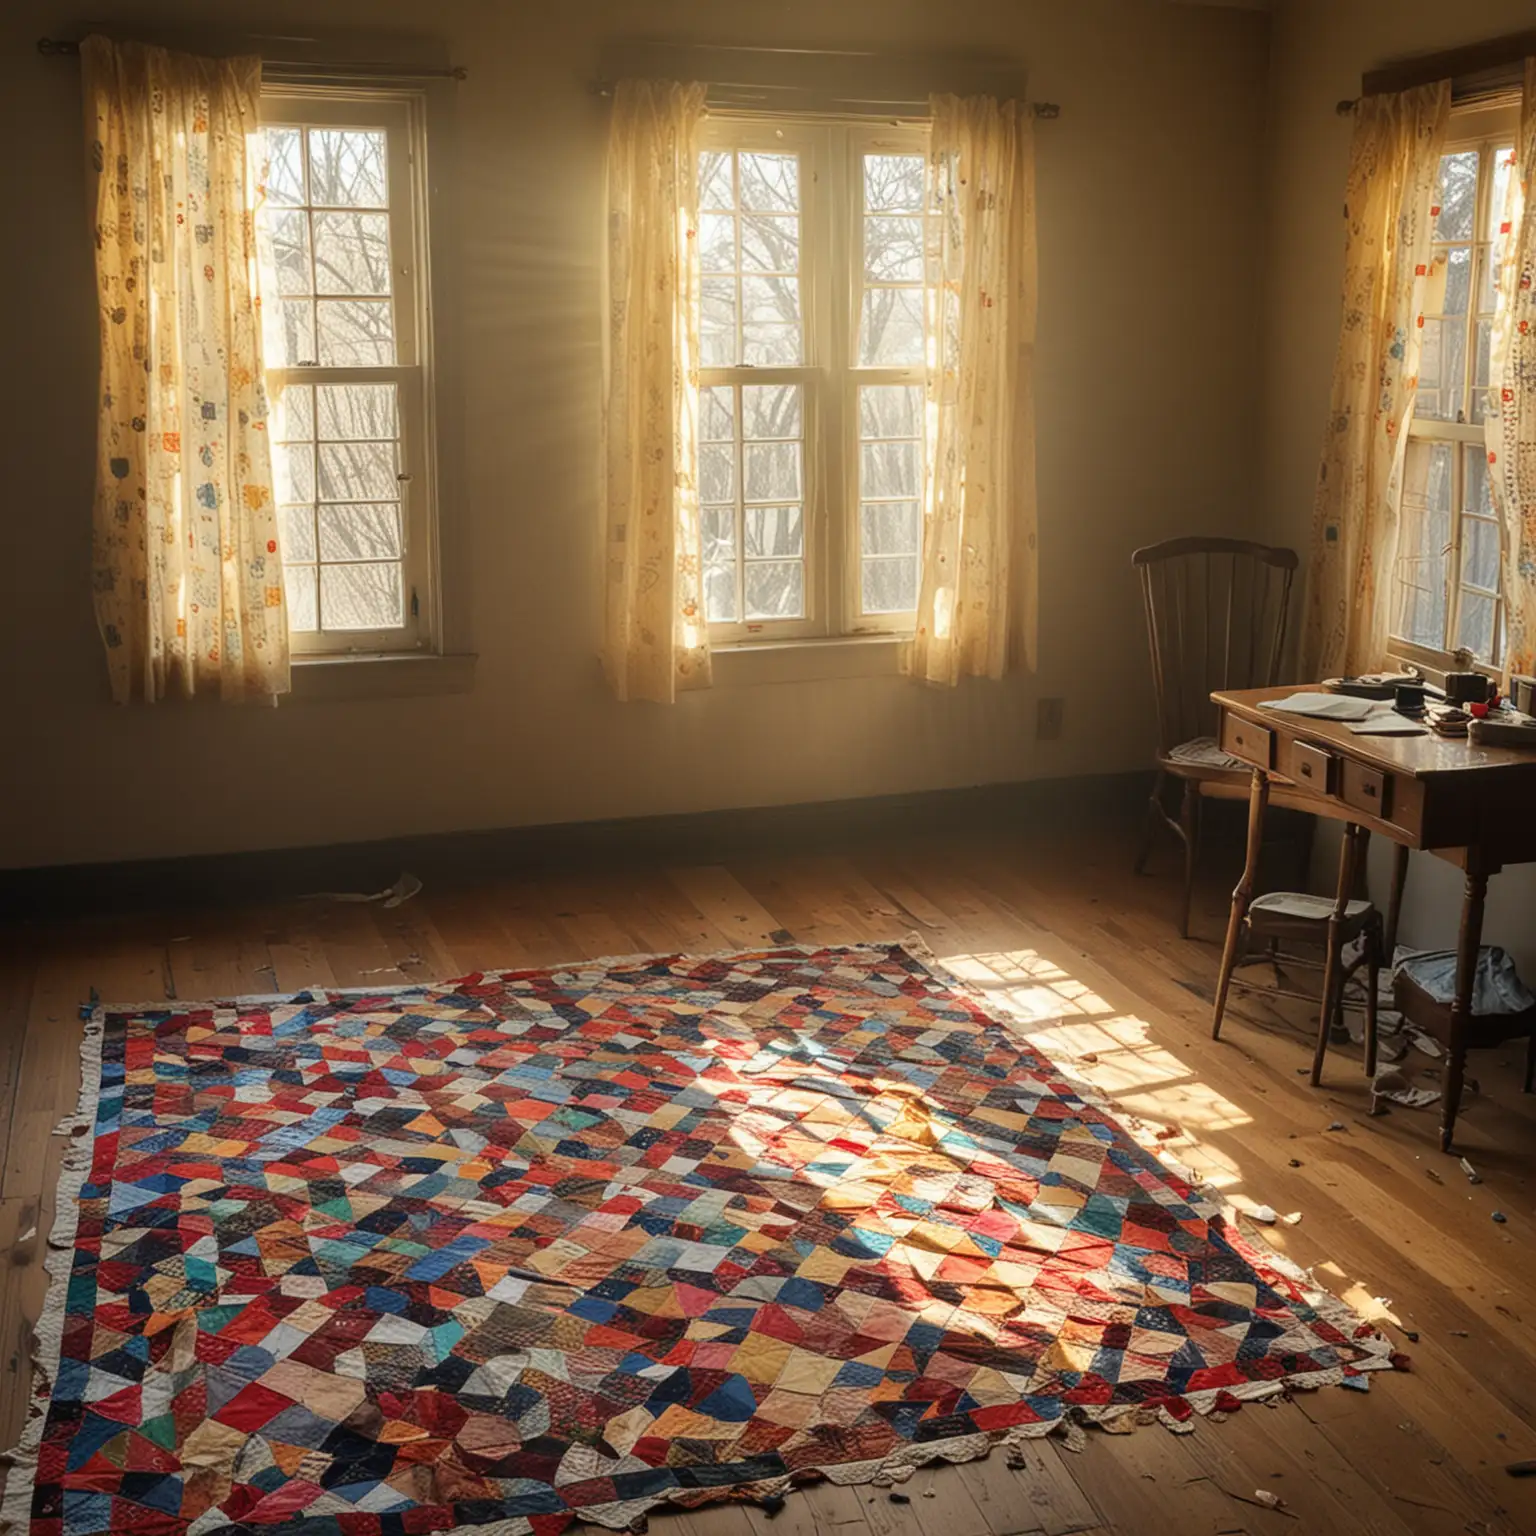 Vintage Classroom Interior with Sunlit Wooden Desk and Patchwork Quilt